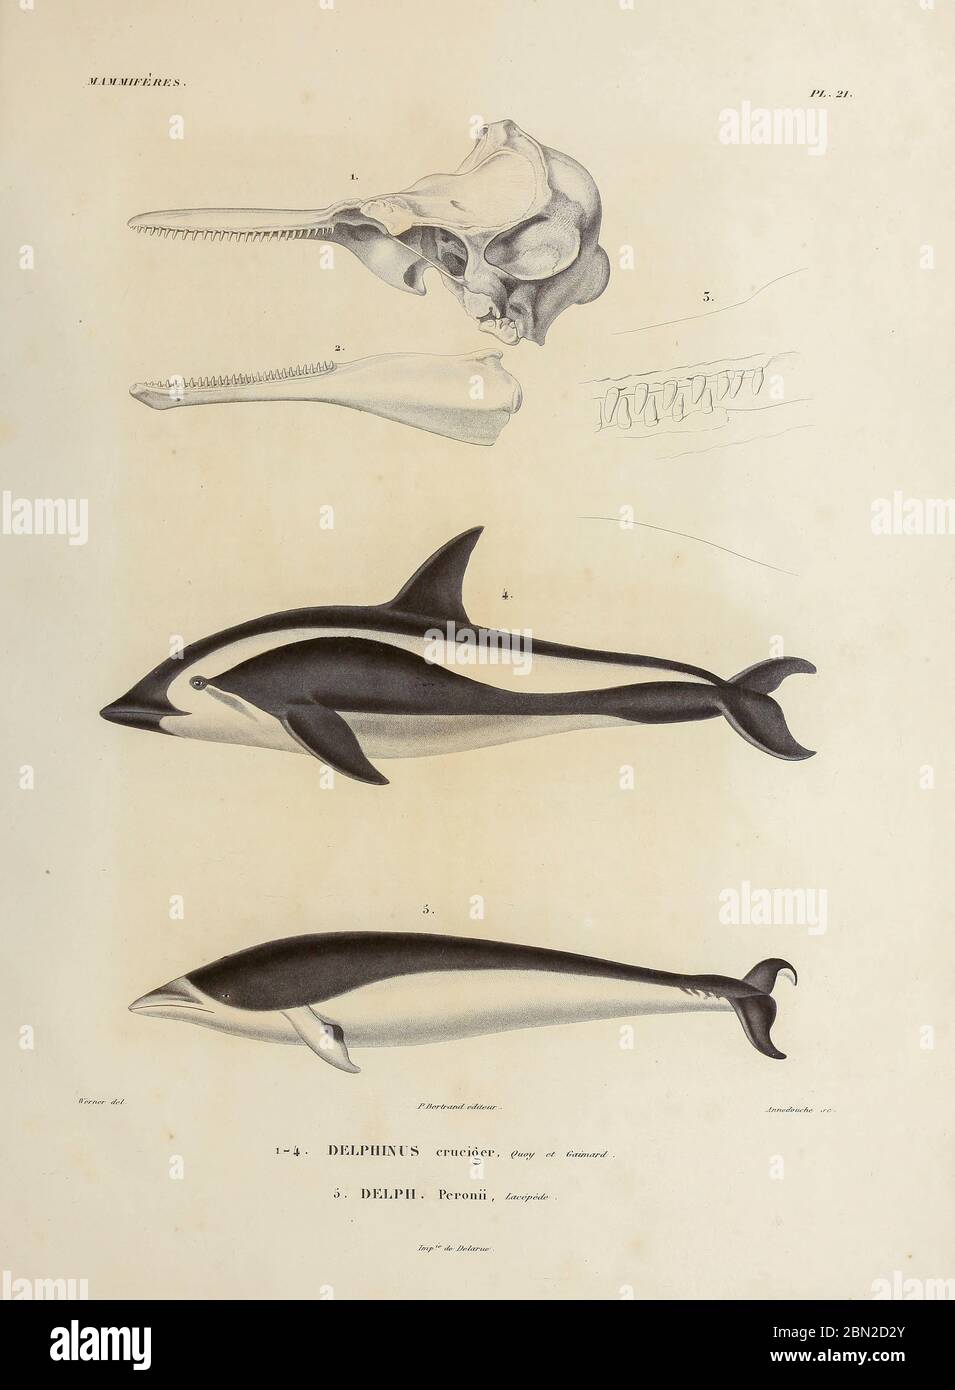 hand coloured sketched of short-beaked common dolphin (Delphinus delphis Here as Delphinus cruiger]) Top. and southern right whale dolphin (Lissodelphis peronii [Here as Delph peronii]) Bottom. From the book 'Voyage dans l'Amérique Méridionale' [Journey to South America: (Brazil, the eastern republic of Uruguay, the Argentine Republic, Patagonia, the republic of Chile, the republic of Bolivia, the republic of Peru), executed during the years 1826 - 1833] 4th volume By: Orbigny, Alcide Dessalines d', d'Orbigny, 1802-1857; Montagne, Jean François Camille, 1784-1866; Martius, Karl Friedrich Phil Stock Photo